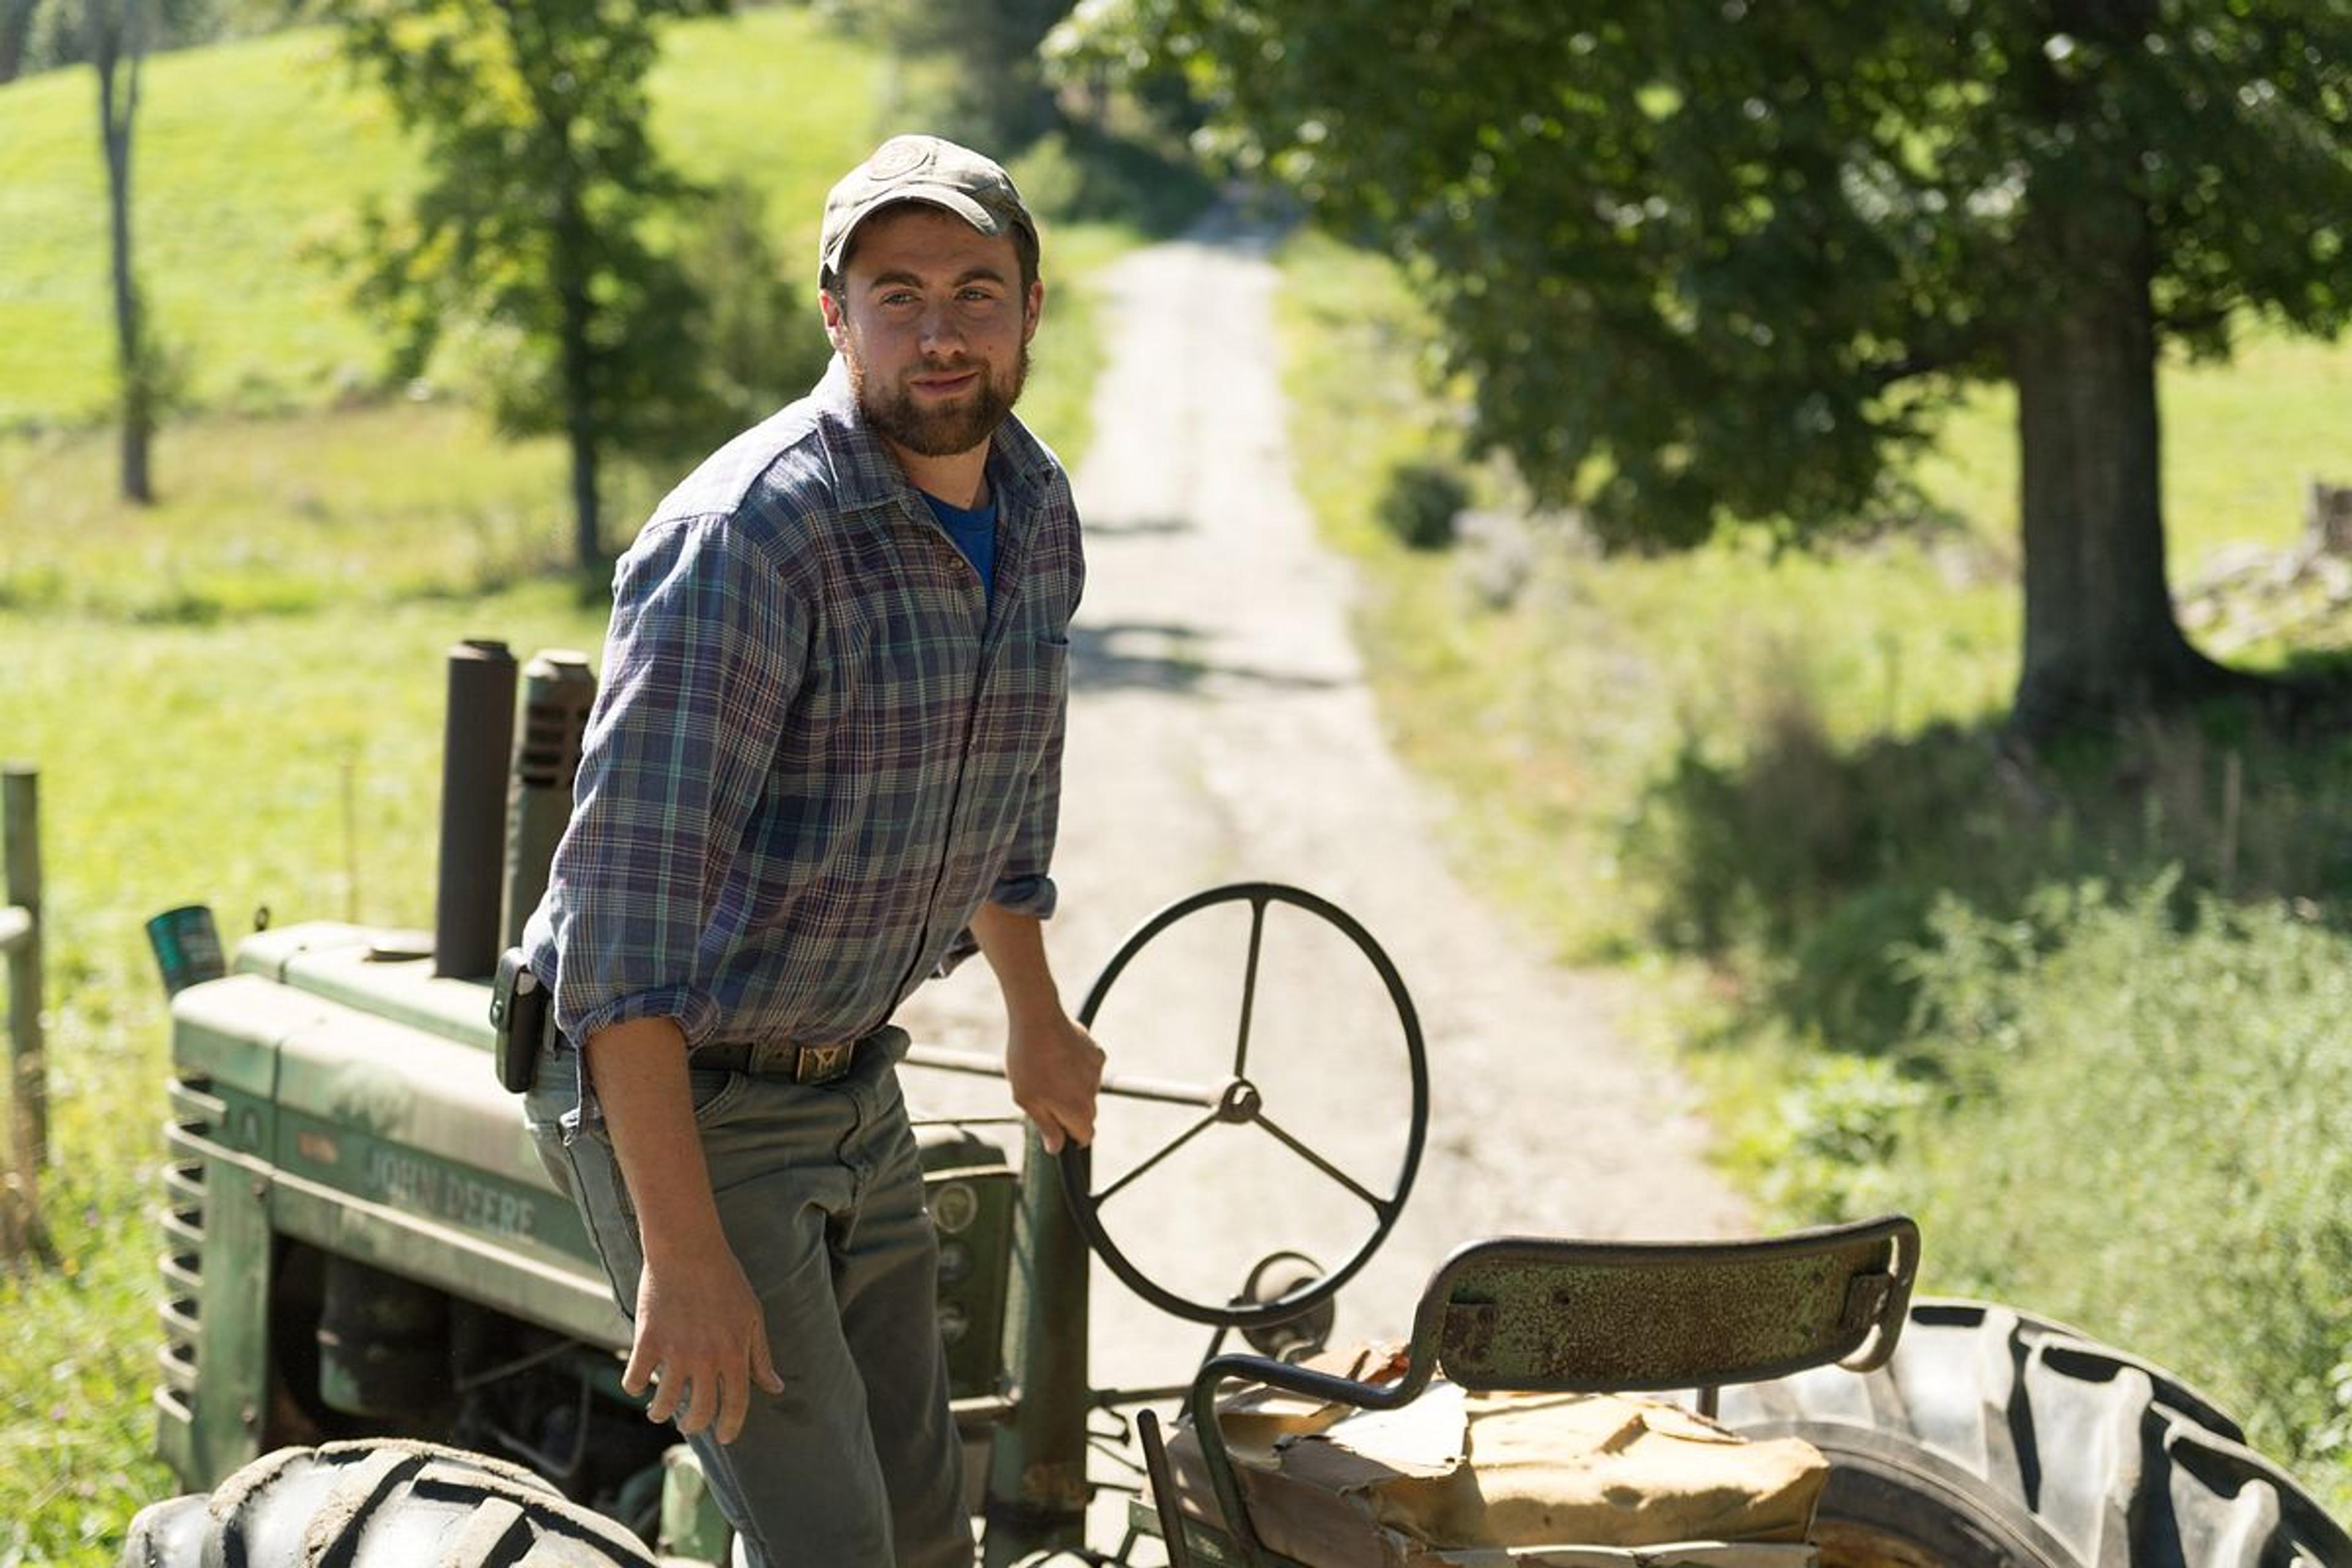 Henry Pearl, who has an organic farm in Vermont, hops off a tractor.